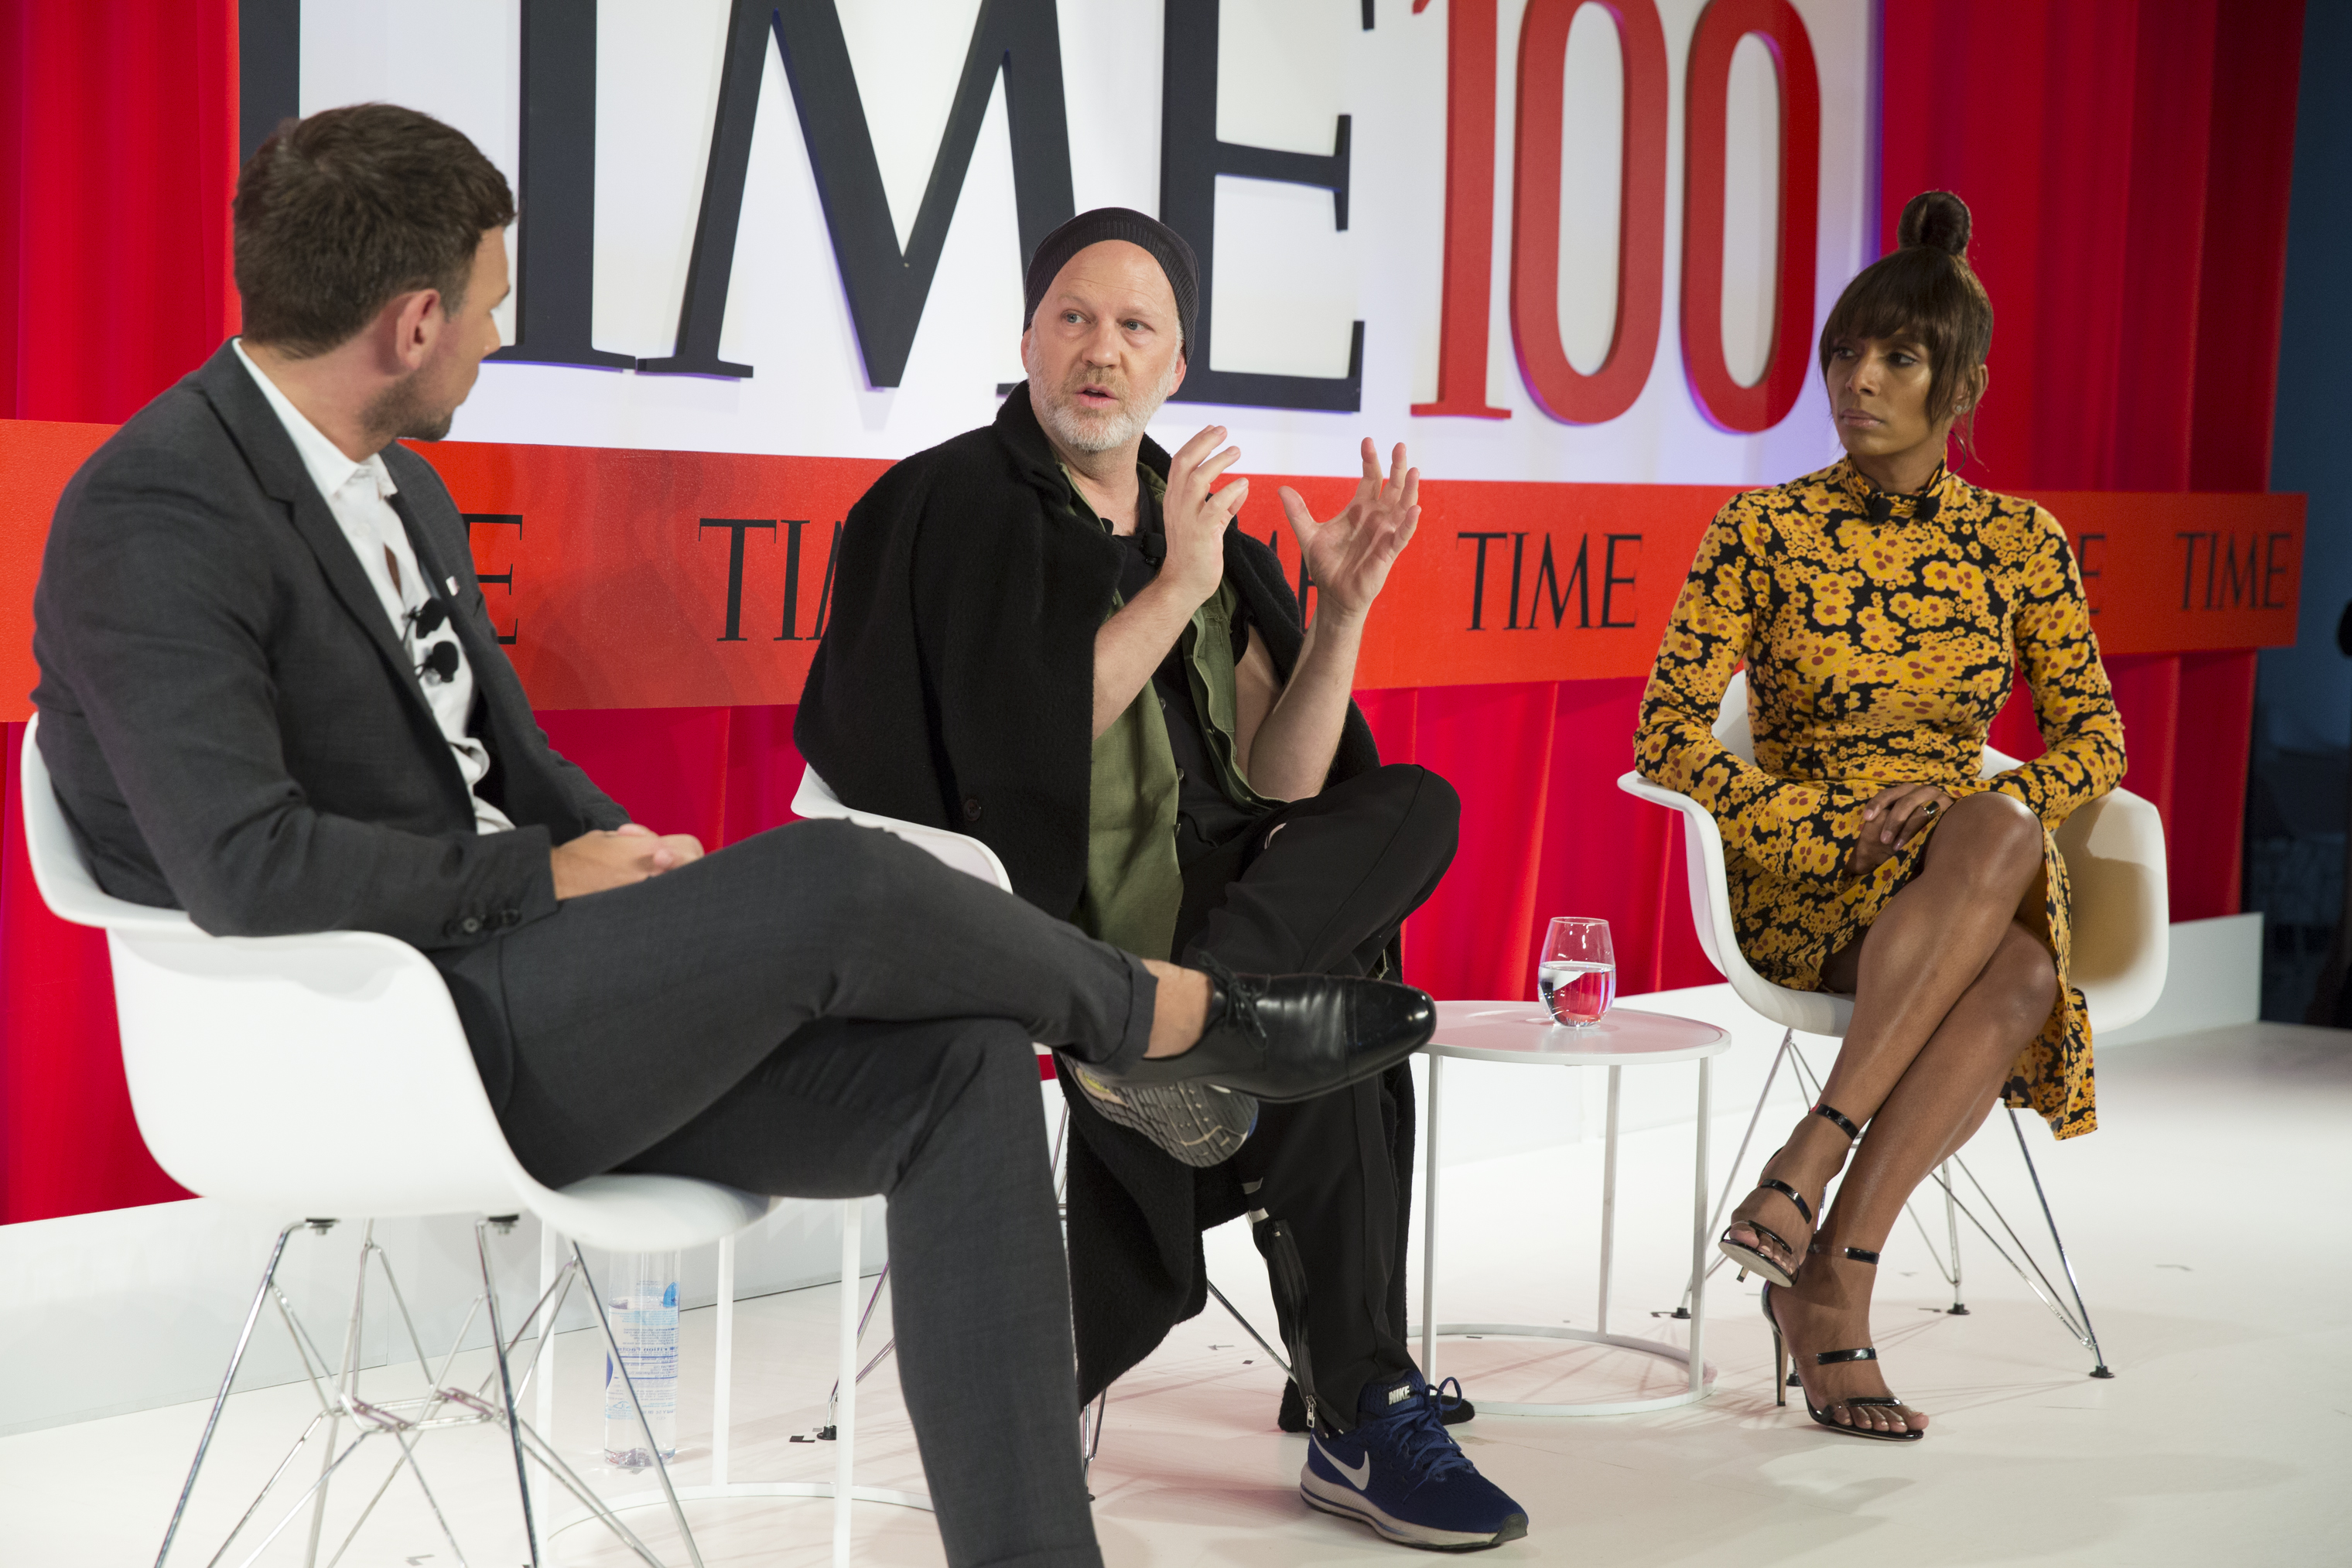 (L-R) Sam Lansky, Ryan Murphy and Janet Mock speak at a panel on Telling Stories That Matter at the TIME100 Summit in New York, on April 23, 2019.